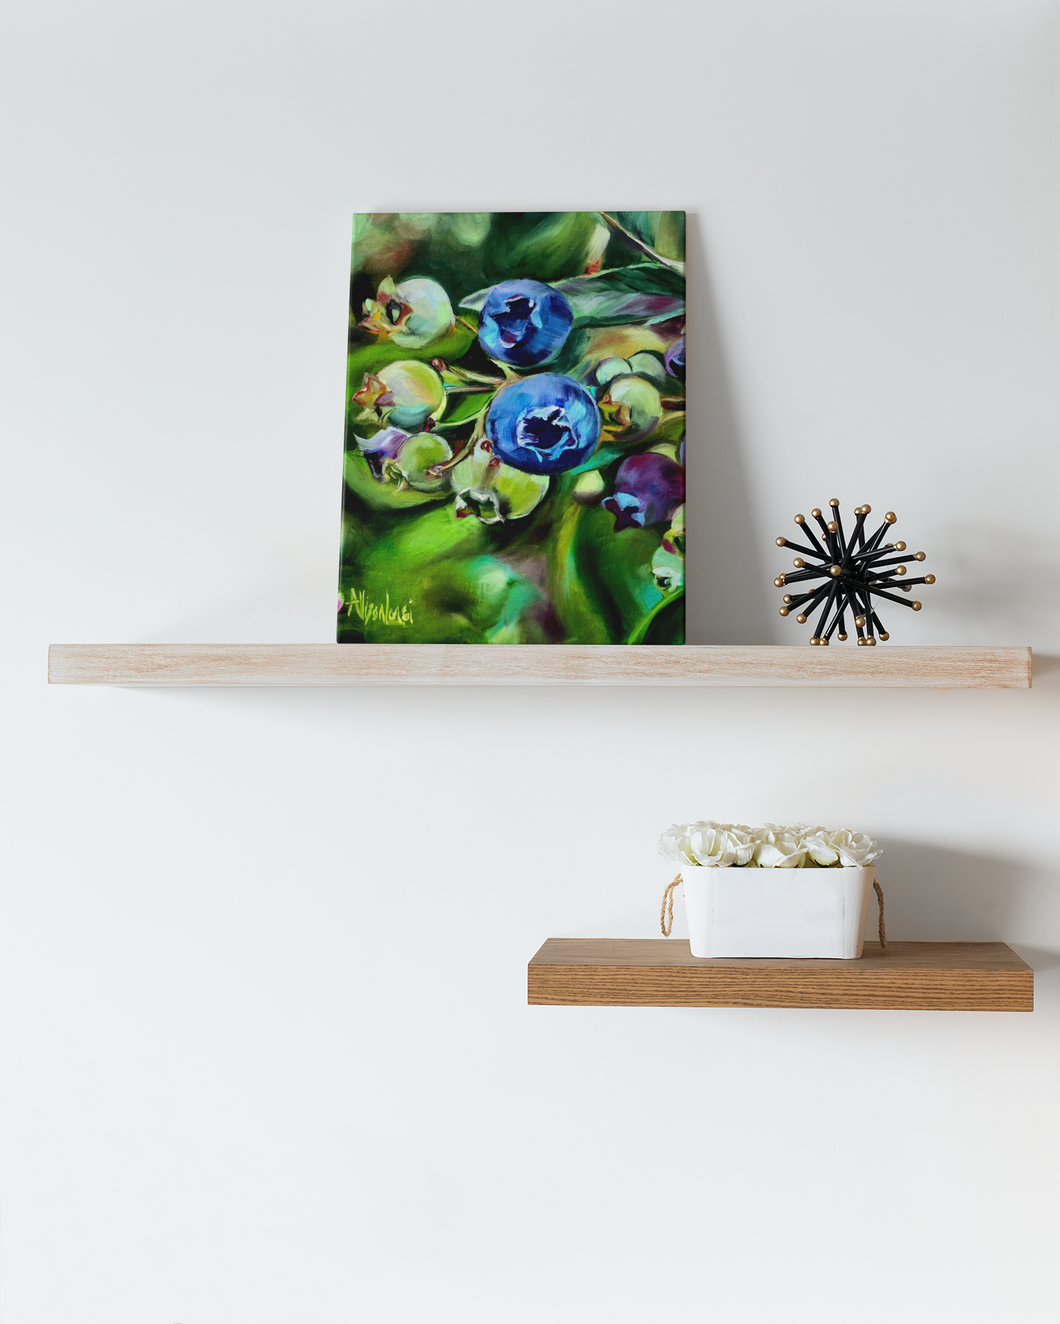 Blueberry Girl Blueberries Gallery Wrapped CANVAS Print